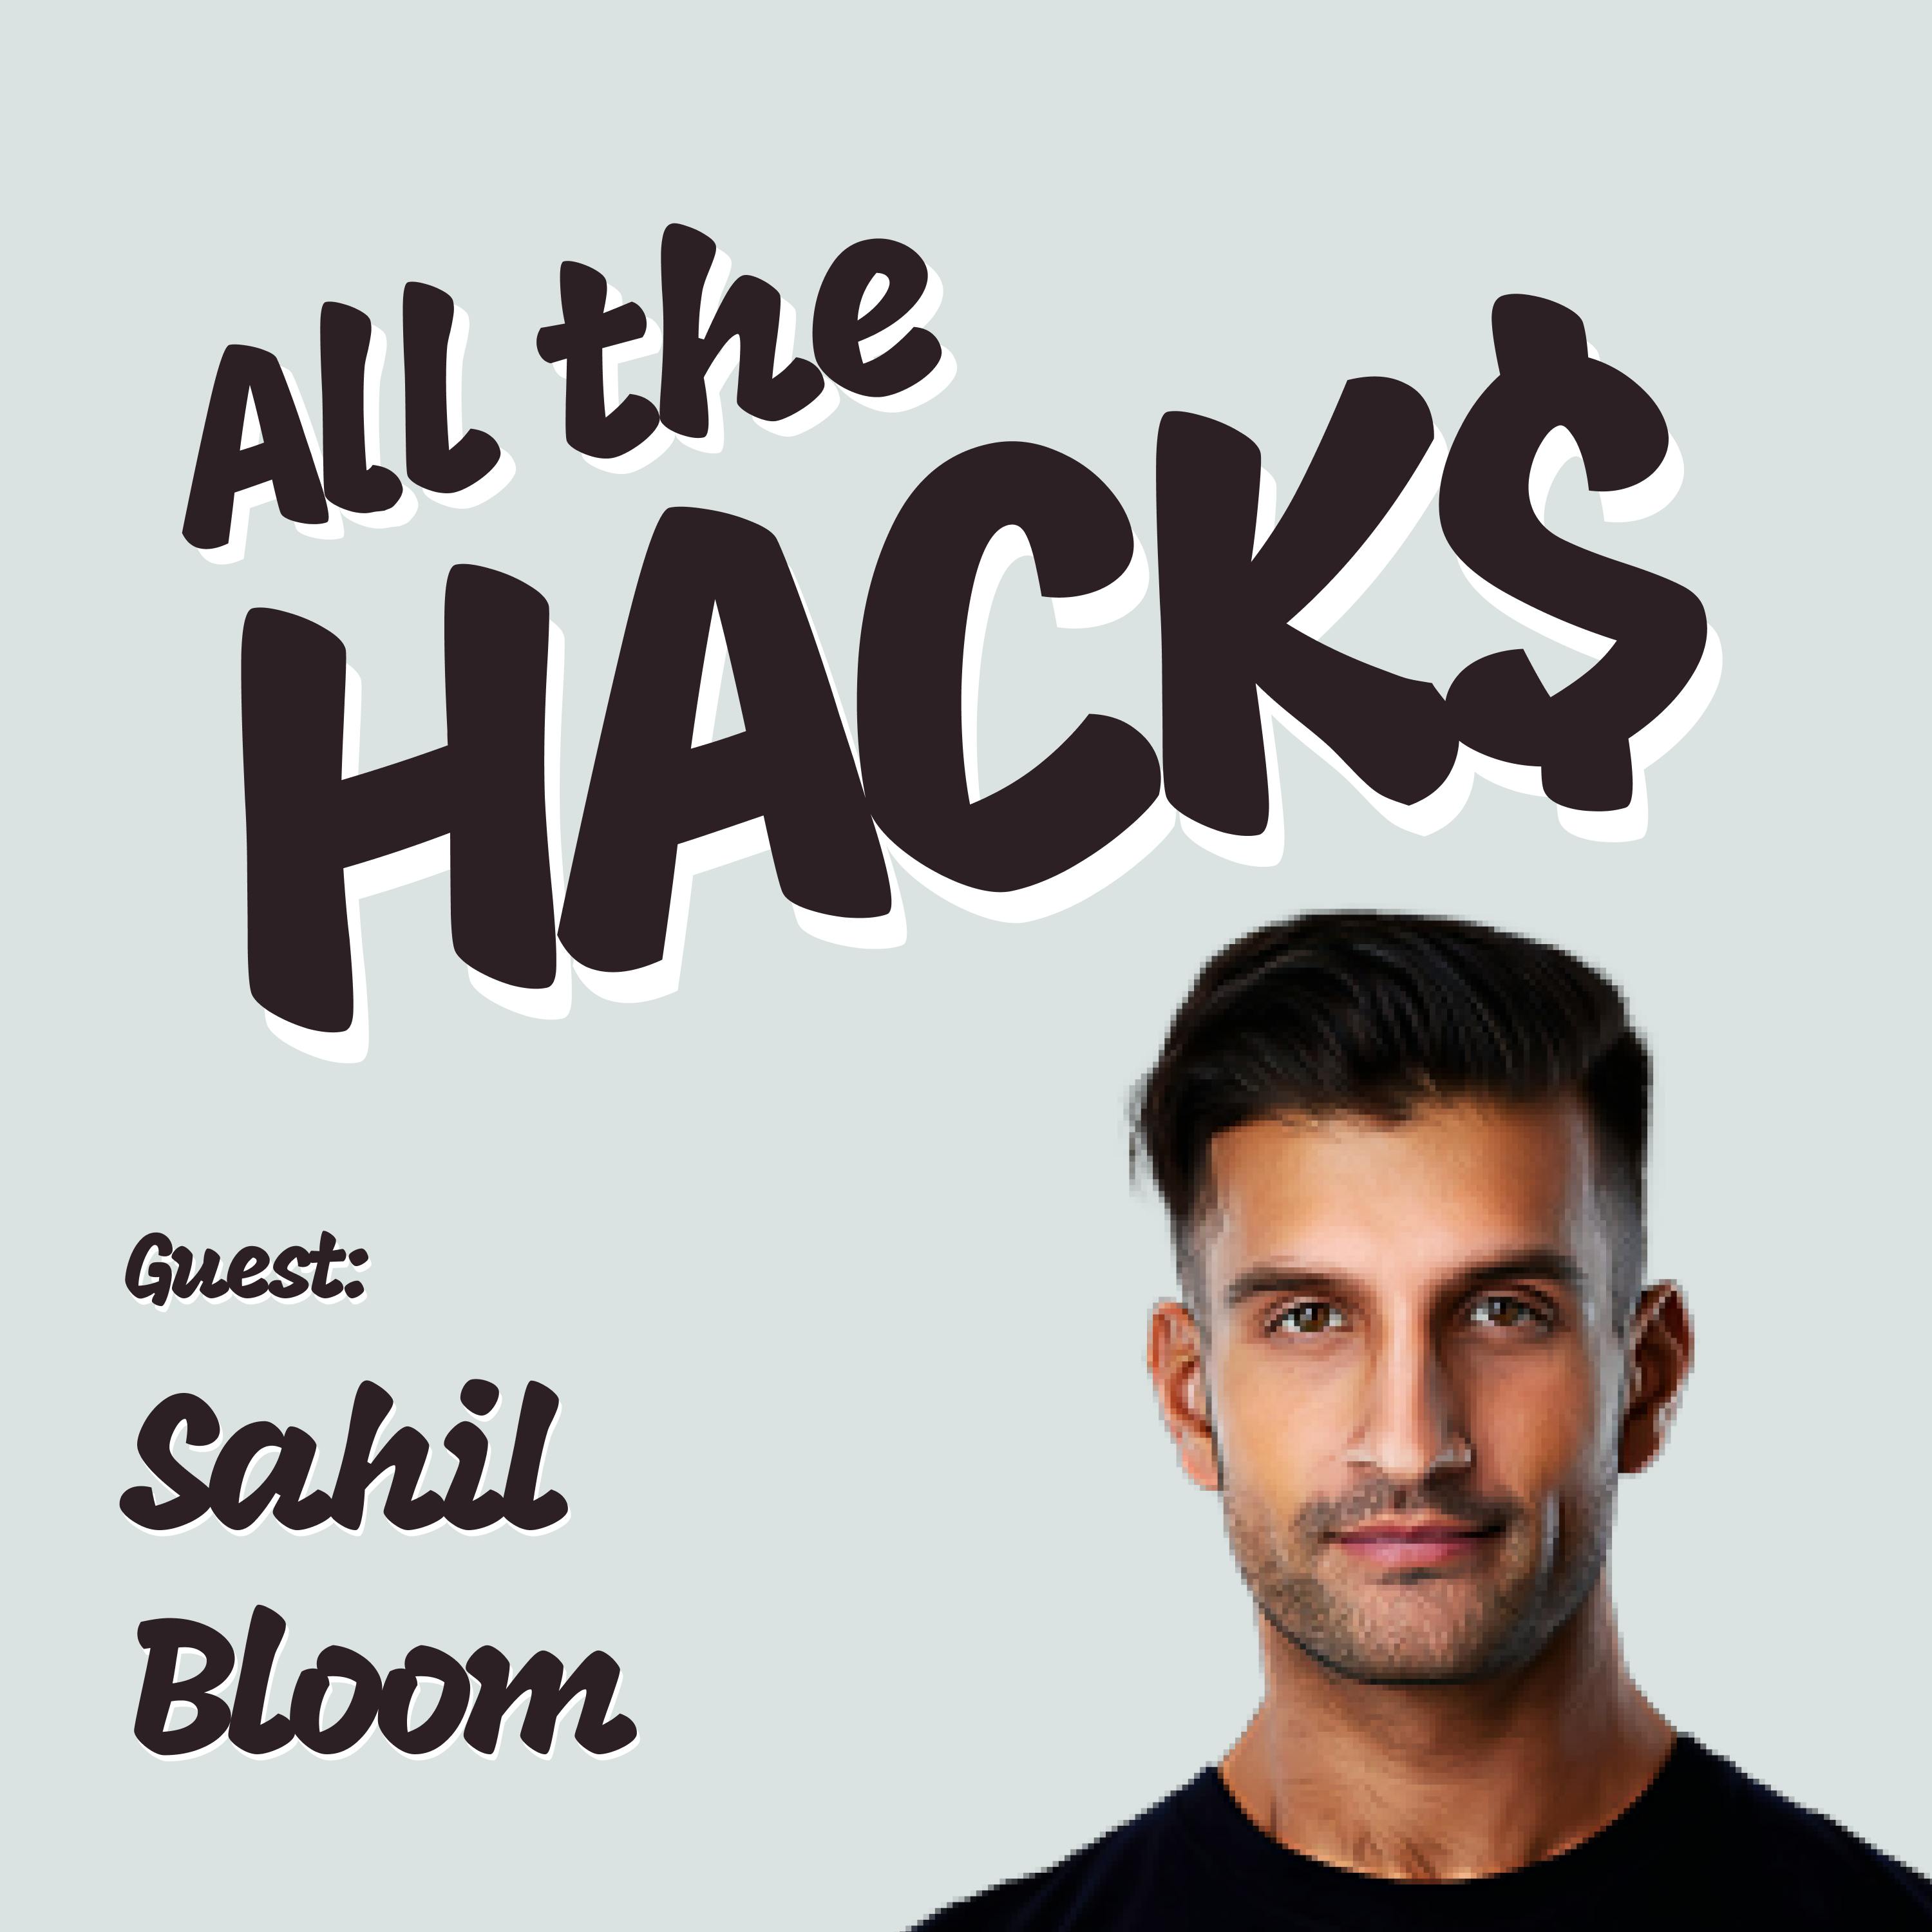 Top Ways to Make This Year Amazing and Seven Simple Questions for Your Annual Review with Sahil Bloom